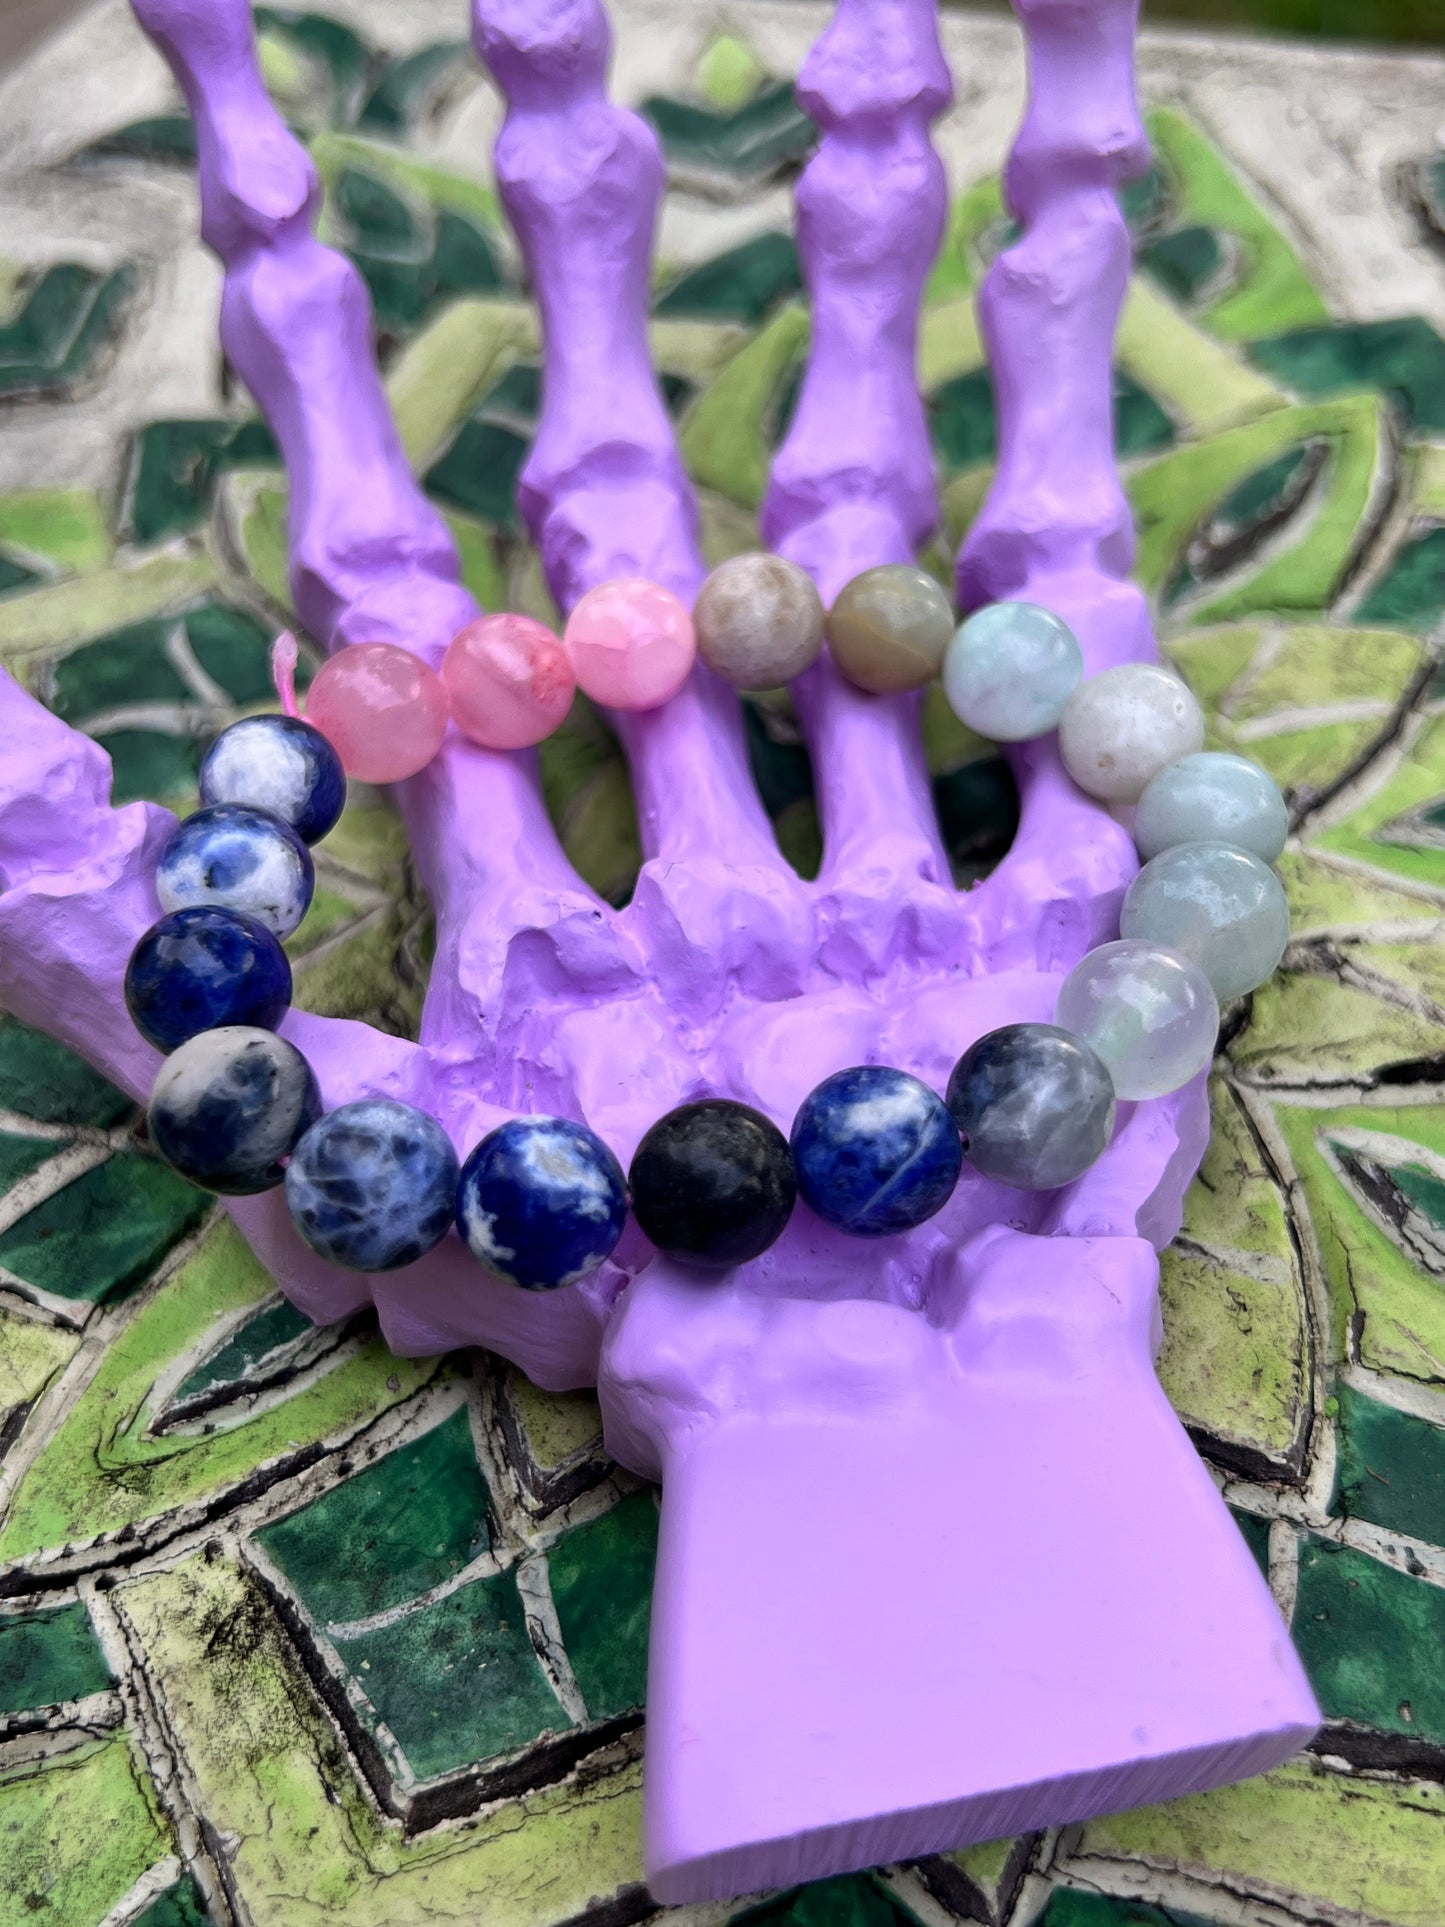 Sodalite and Dyed Agate Elastic Bracelet - Mental Clarity and Emotional Stability